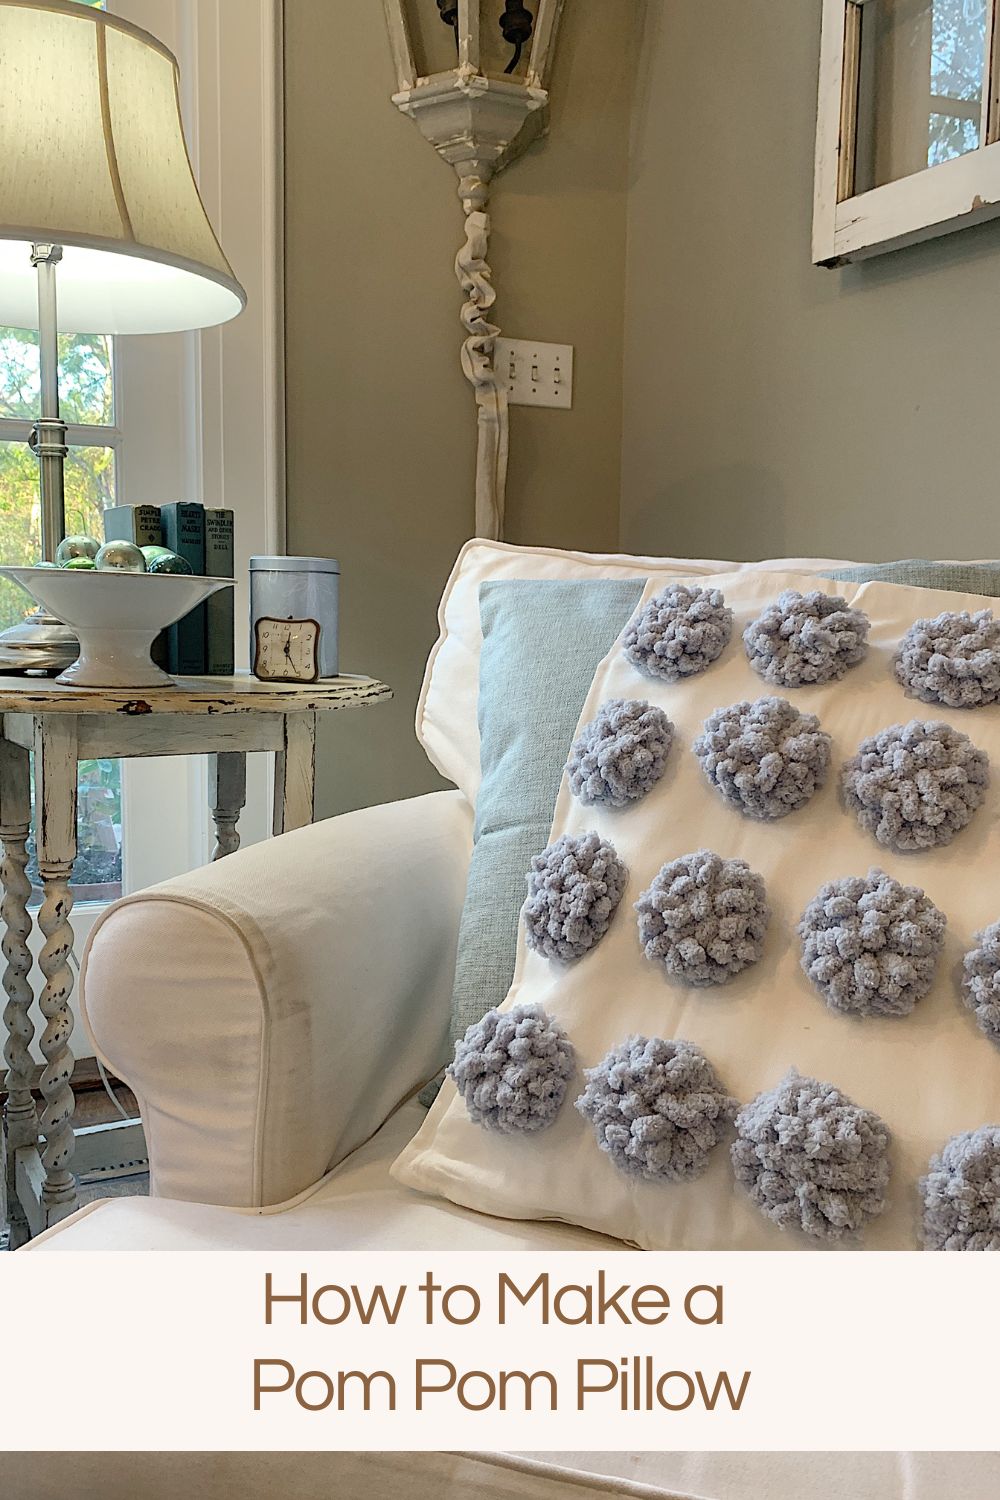 It's a warm and cozy time of the year and I have wanted to make a pom pom pillow for quite some time. I found this chenille yarn and really loved making these.